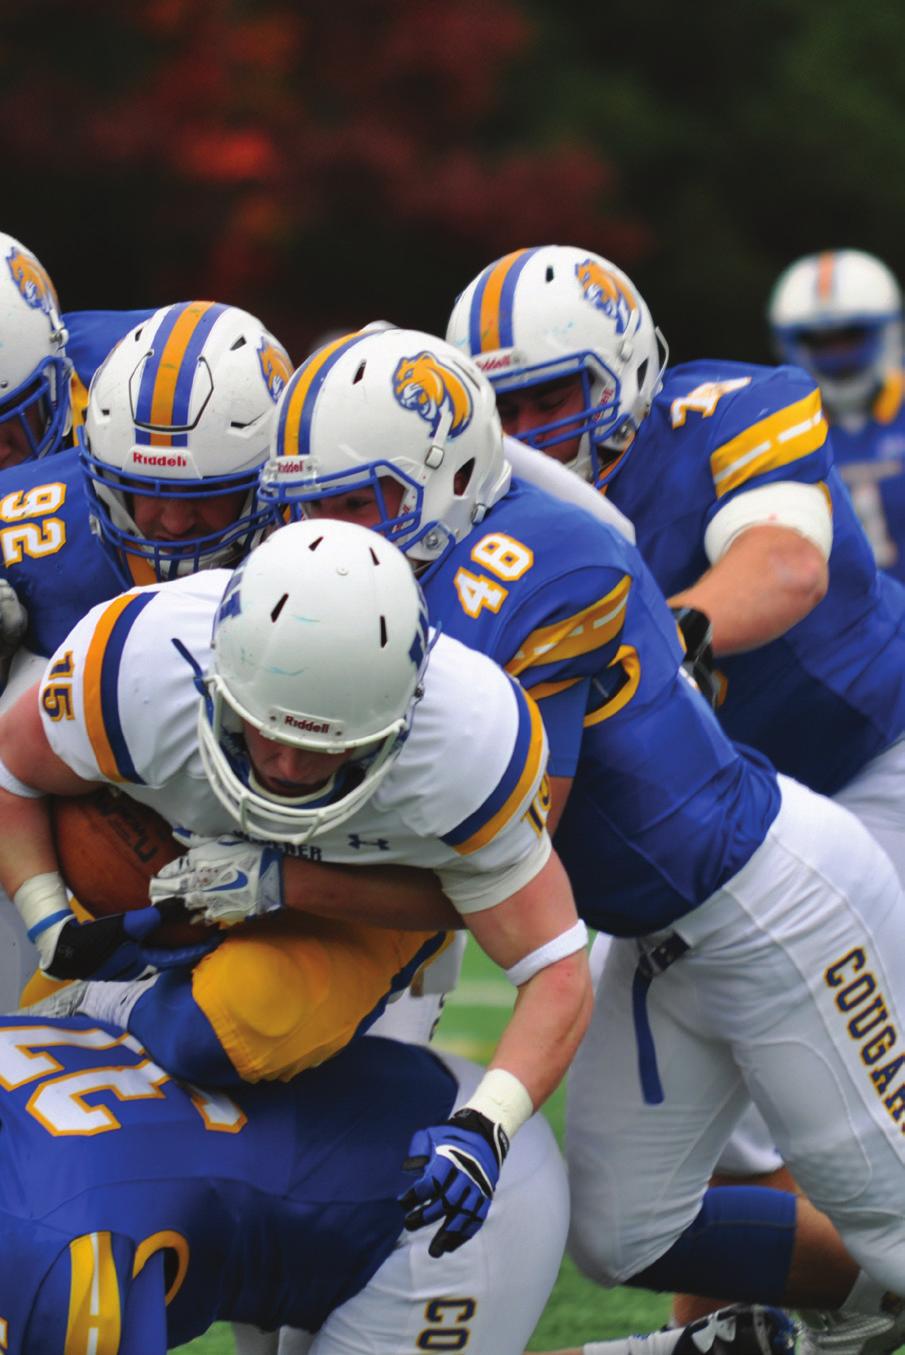 52 PLAYERS NAMED TO MAC ACADEMIC HONOR ROLL The Misericordia University football team enters its sixth varsity season with its biggest roster ever in 2017.